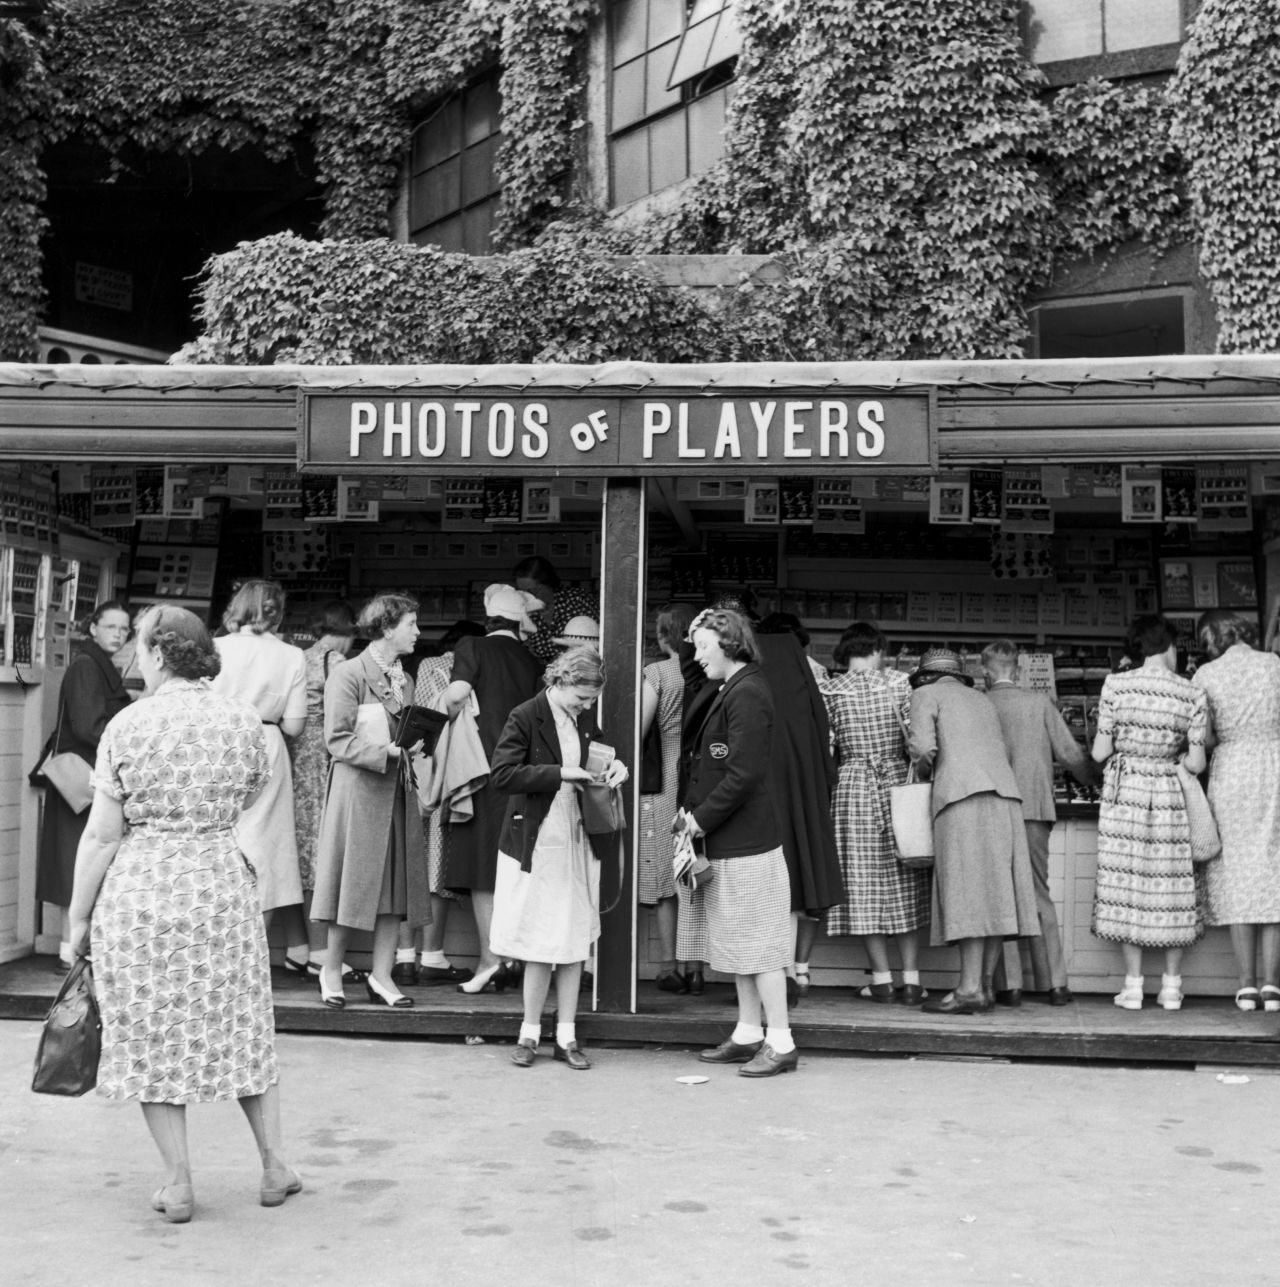 Fans buy photographs of their favorite players at a shop in the grounds of Wimbledon in 1951.